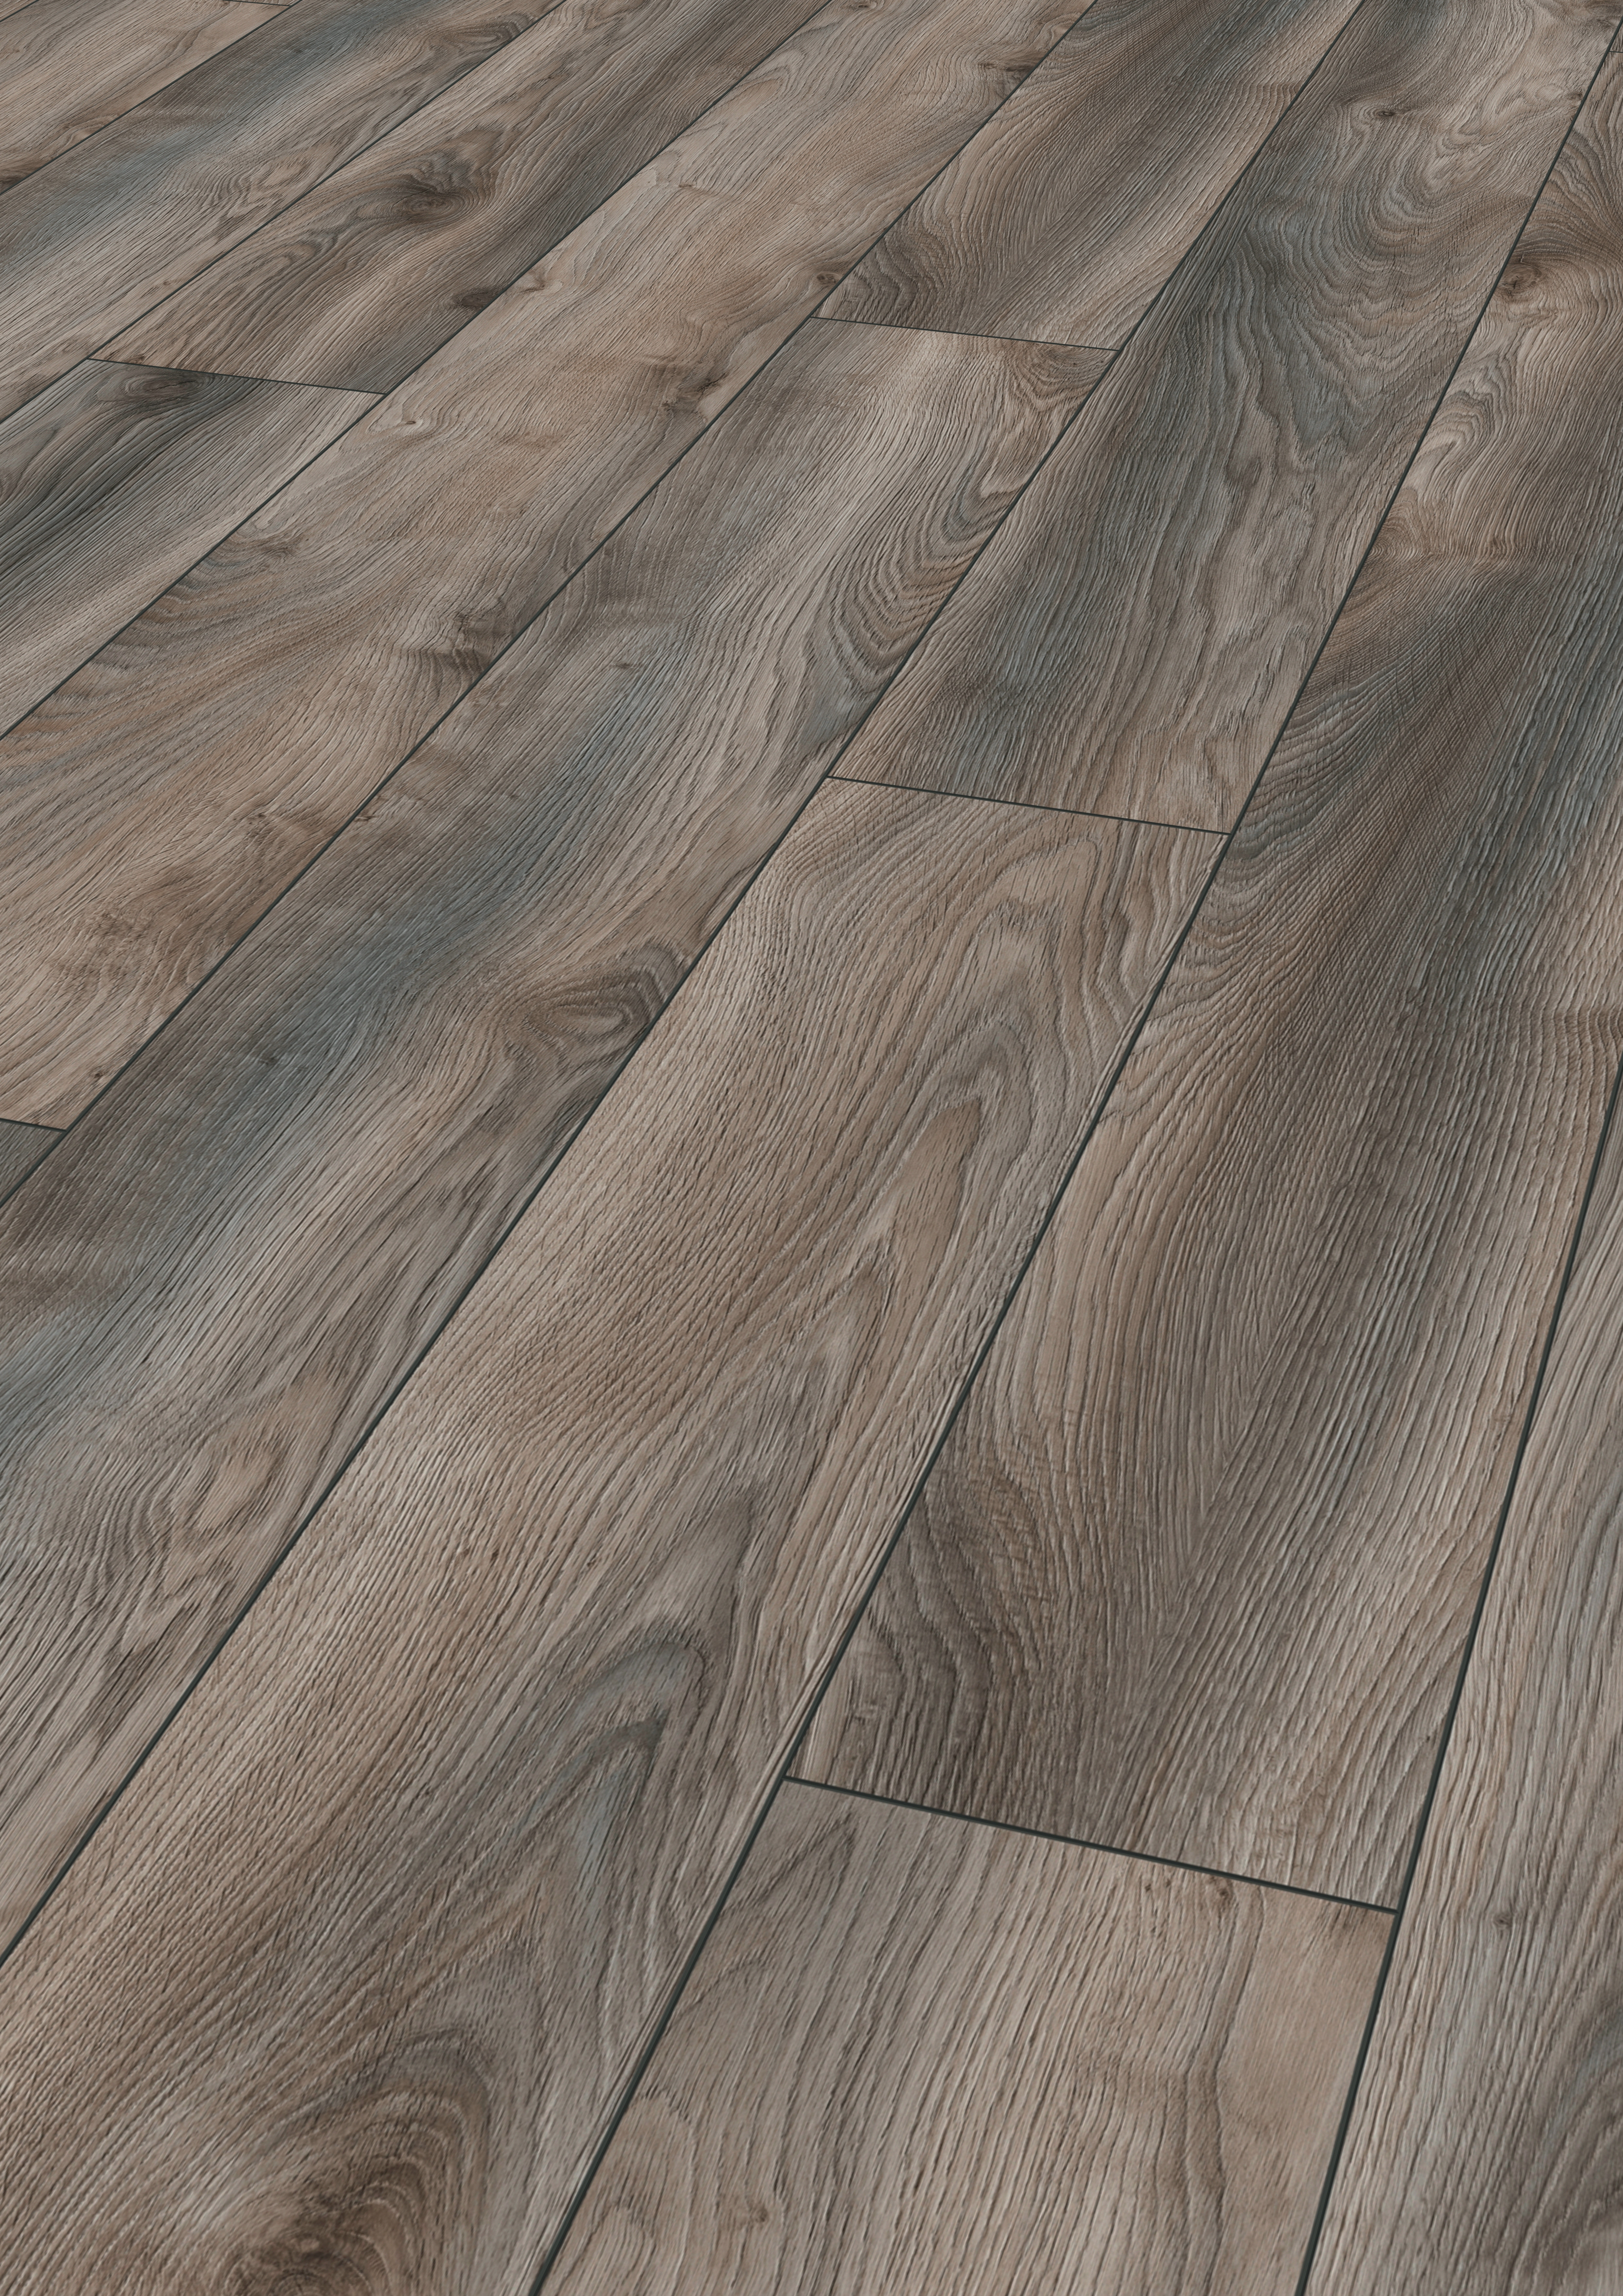 23 Ideal How Do You Install Hardwood Floors On Concrete 2024 free download how do you install hardwood floors on concrete of mammut laminate flooring in country house plank style kronotex in download picture amp